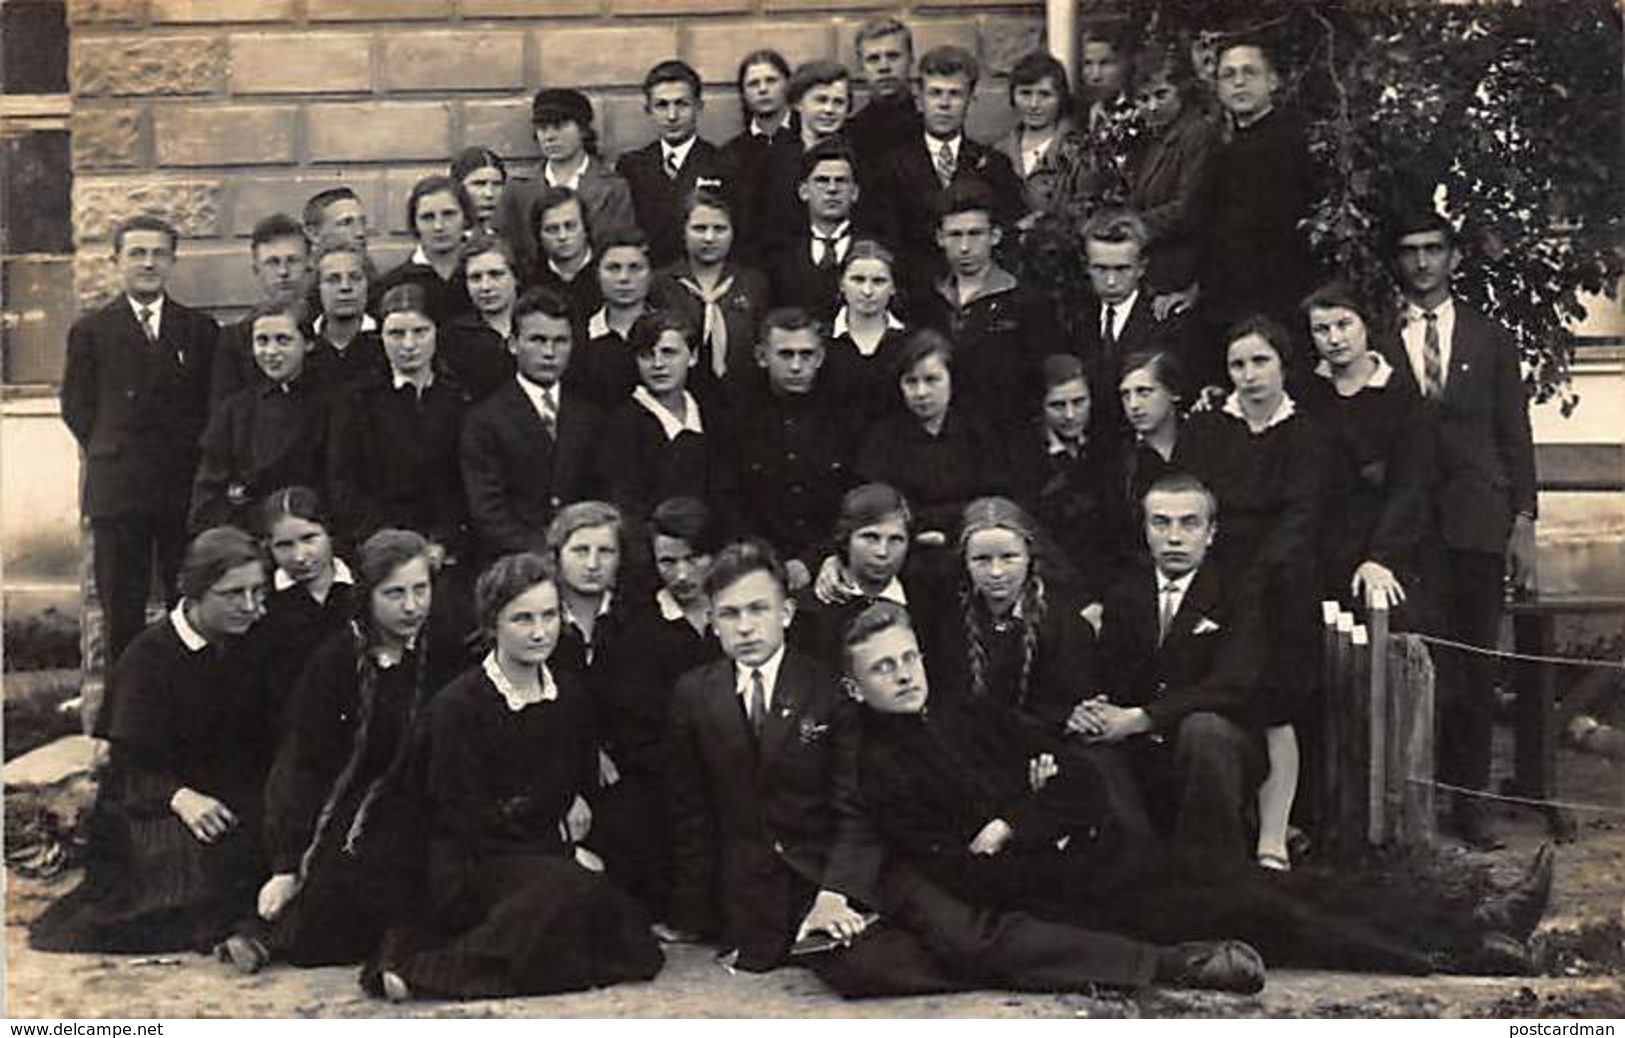 Lithuania - PANEVEZYS - School Boys And Firls, Year 1929 - REAL PHOTO. - Litauen